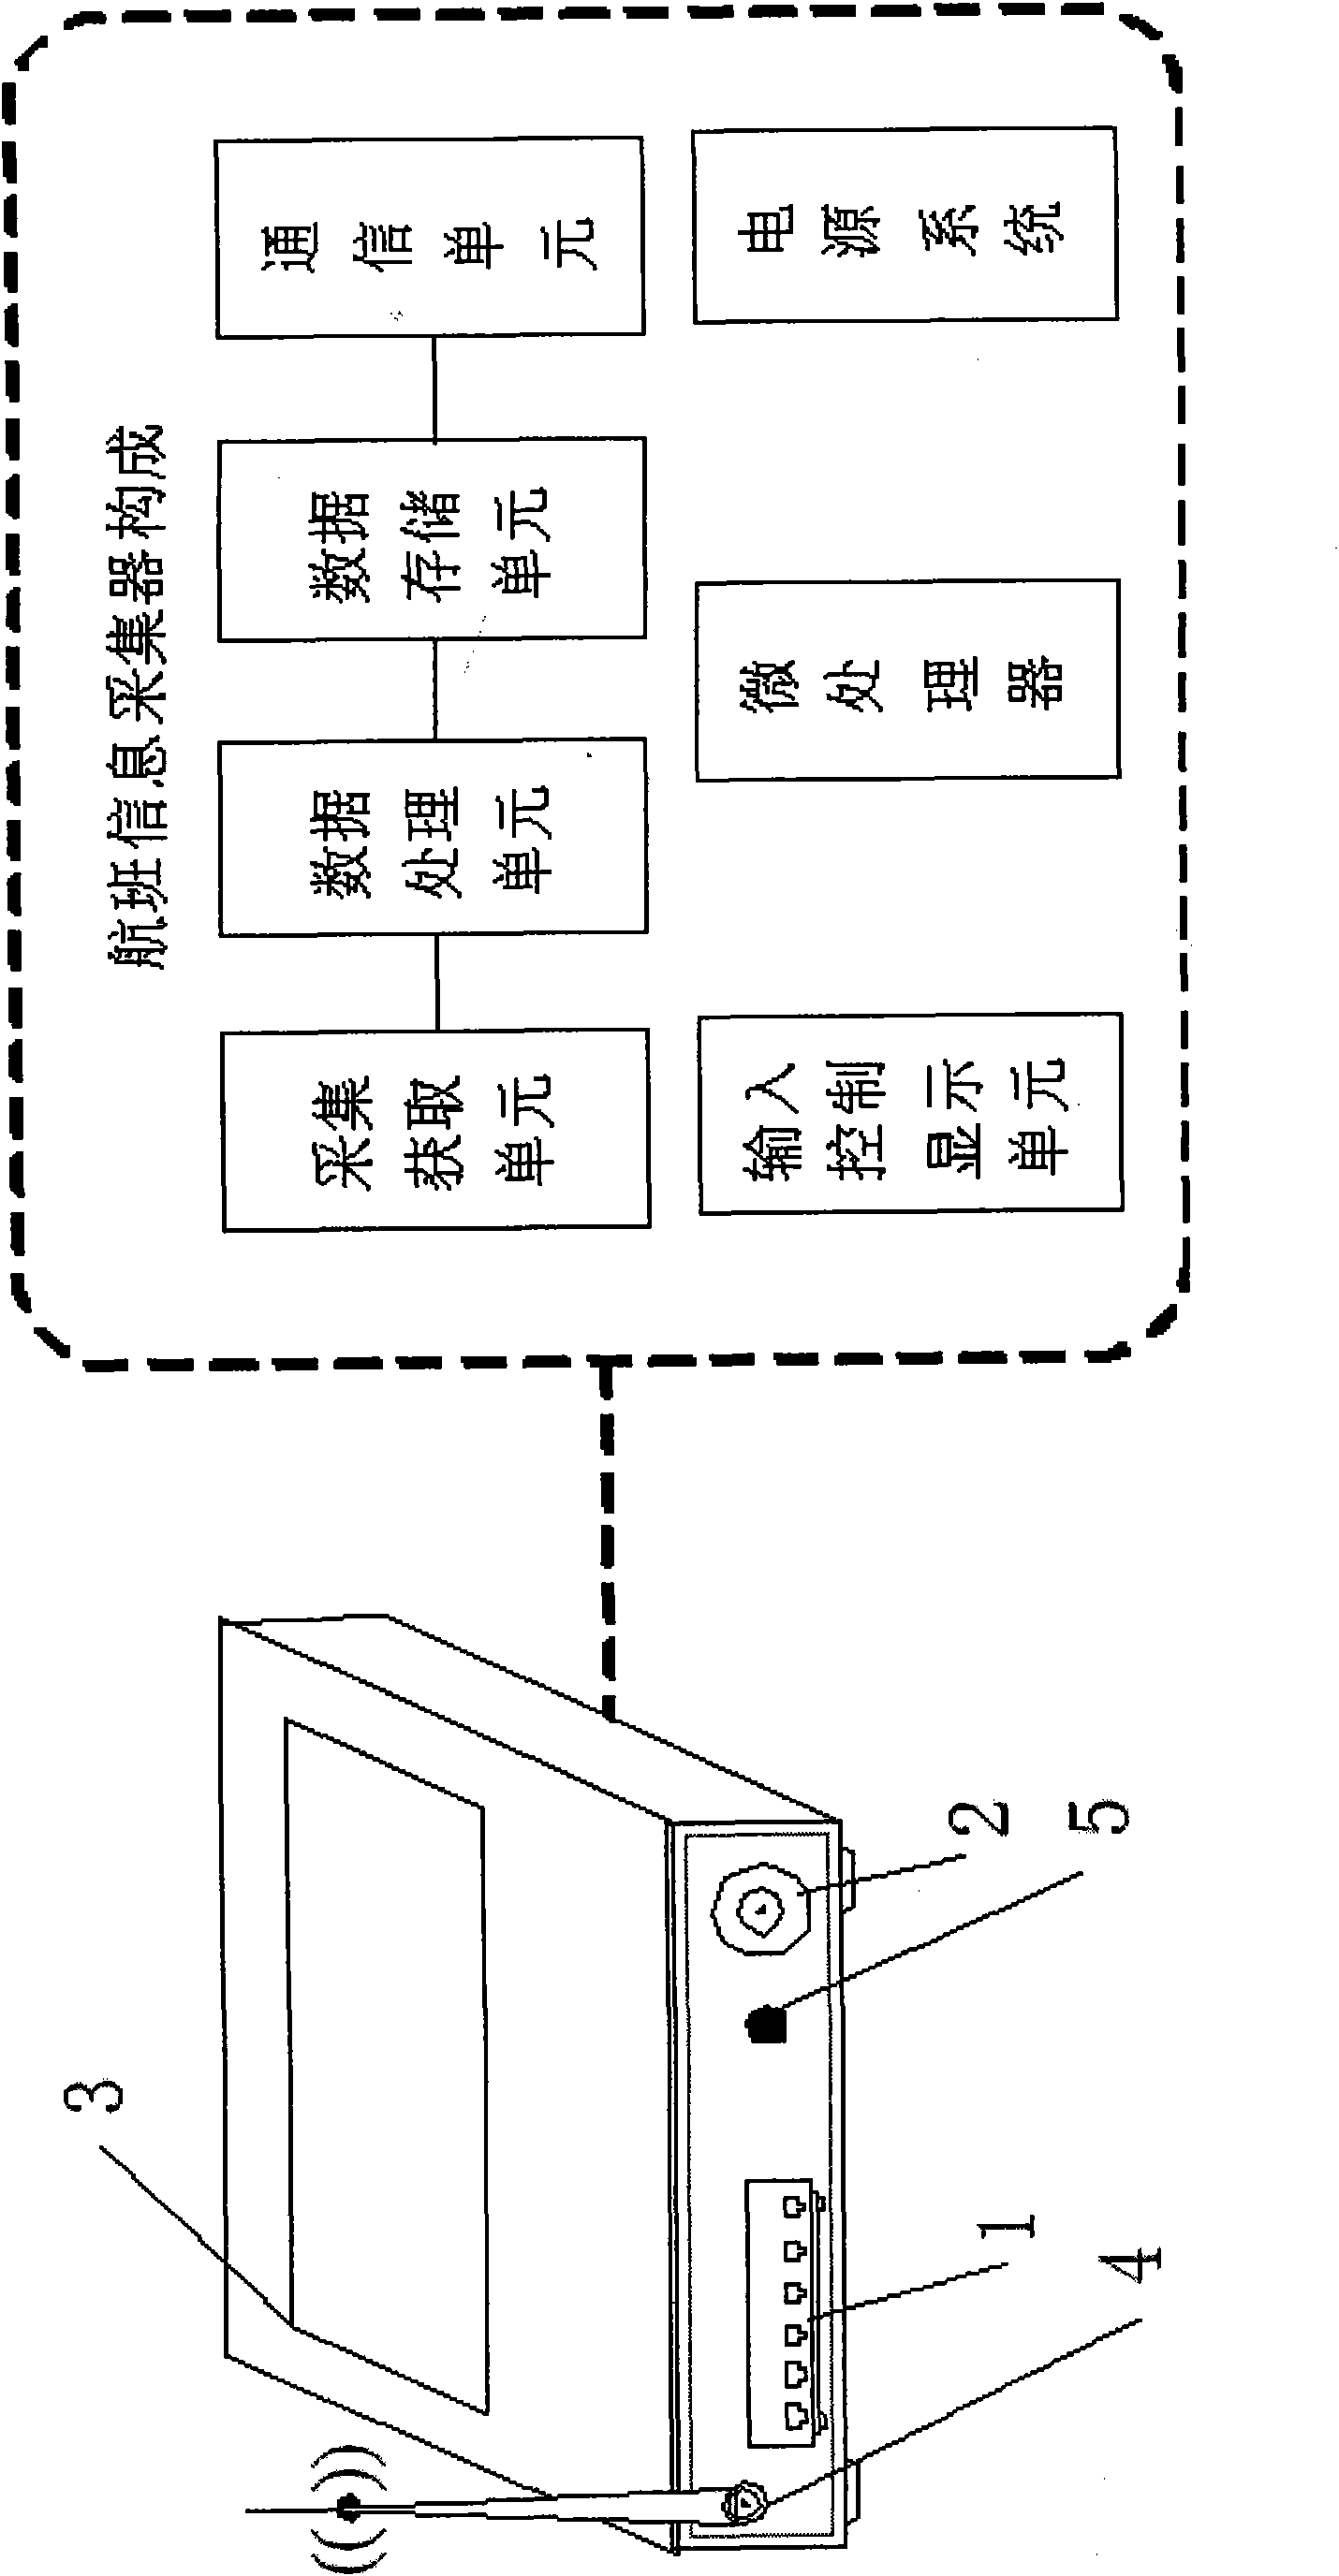 Flight information data acquisition unit and processing method thereof